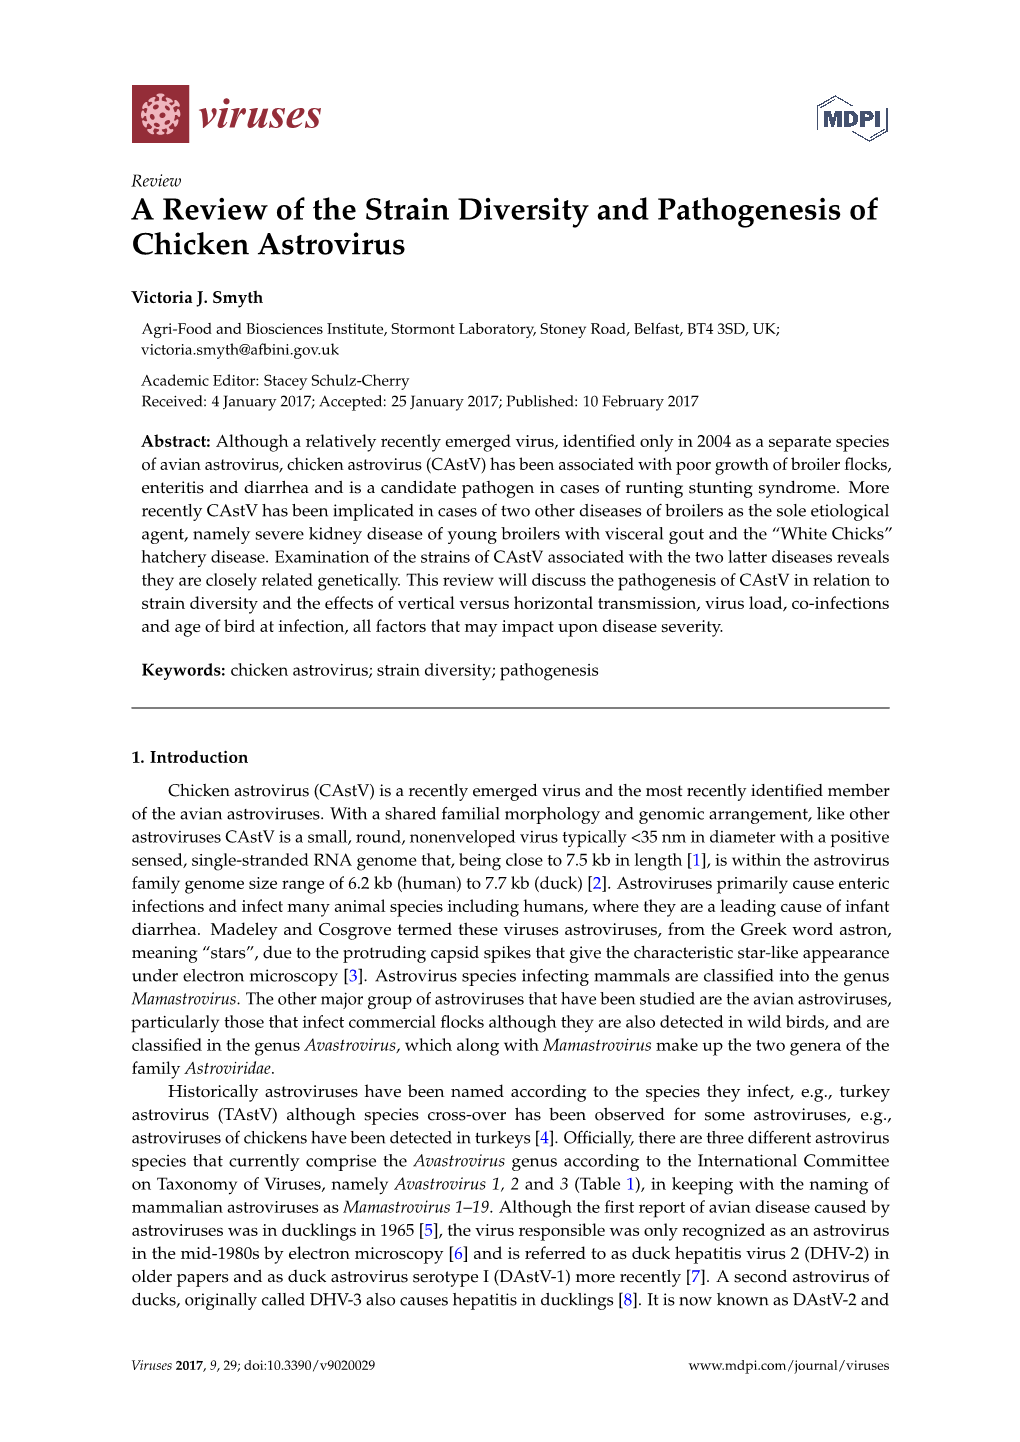 A Review of the Strain Diversity and Pathogenesis of Chicken Astrovirus